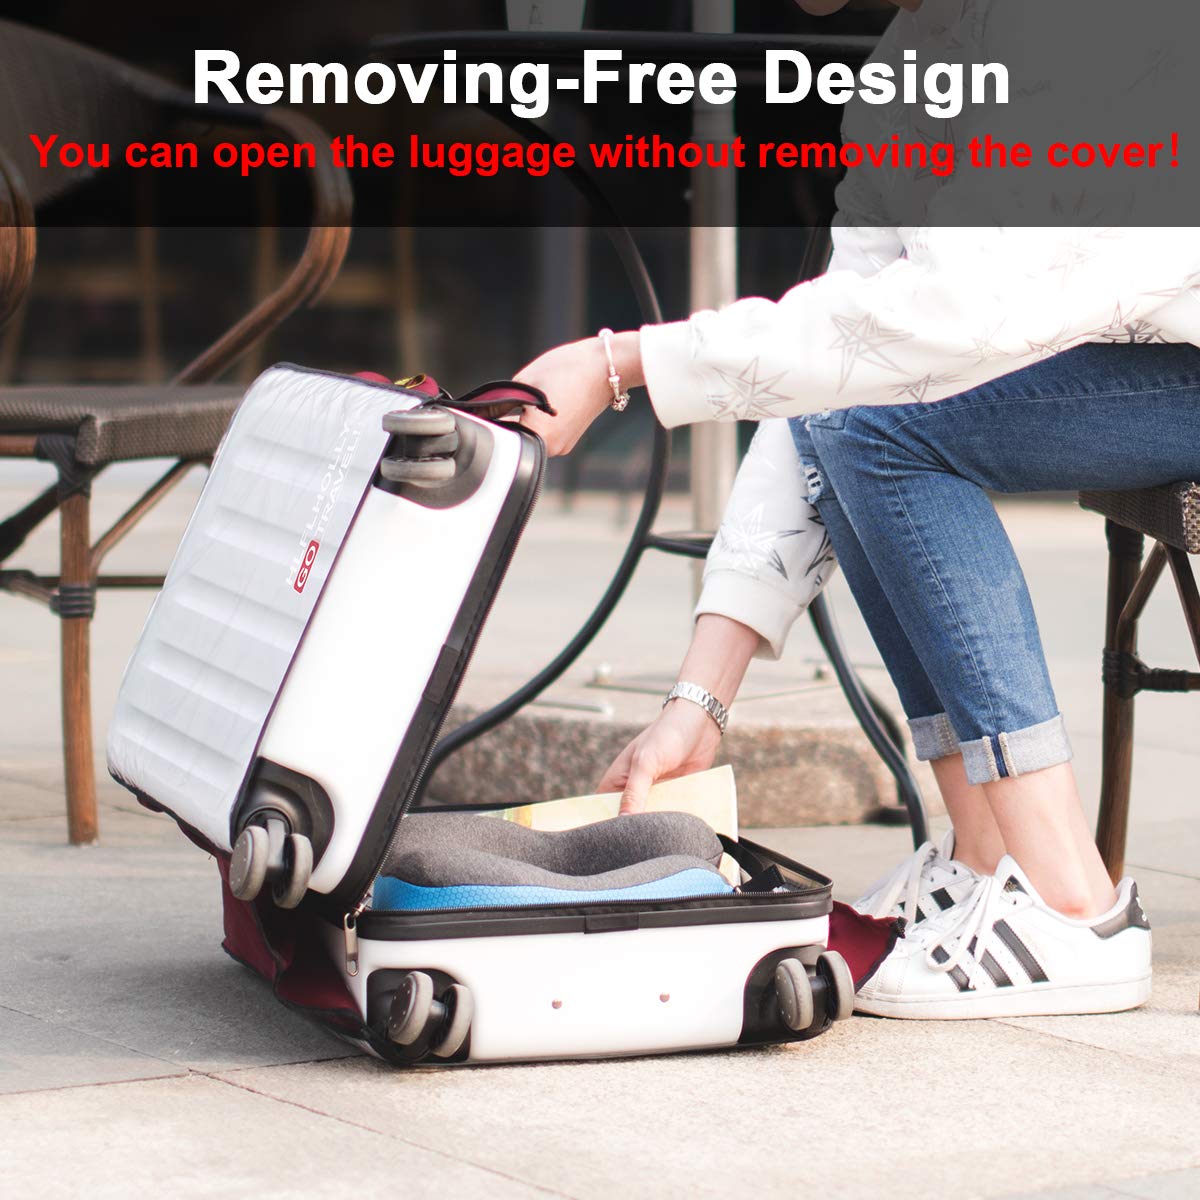 Live - FUL Luggage Protective Film Removal Tutorial